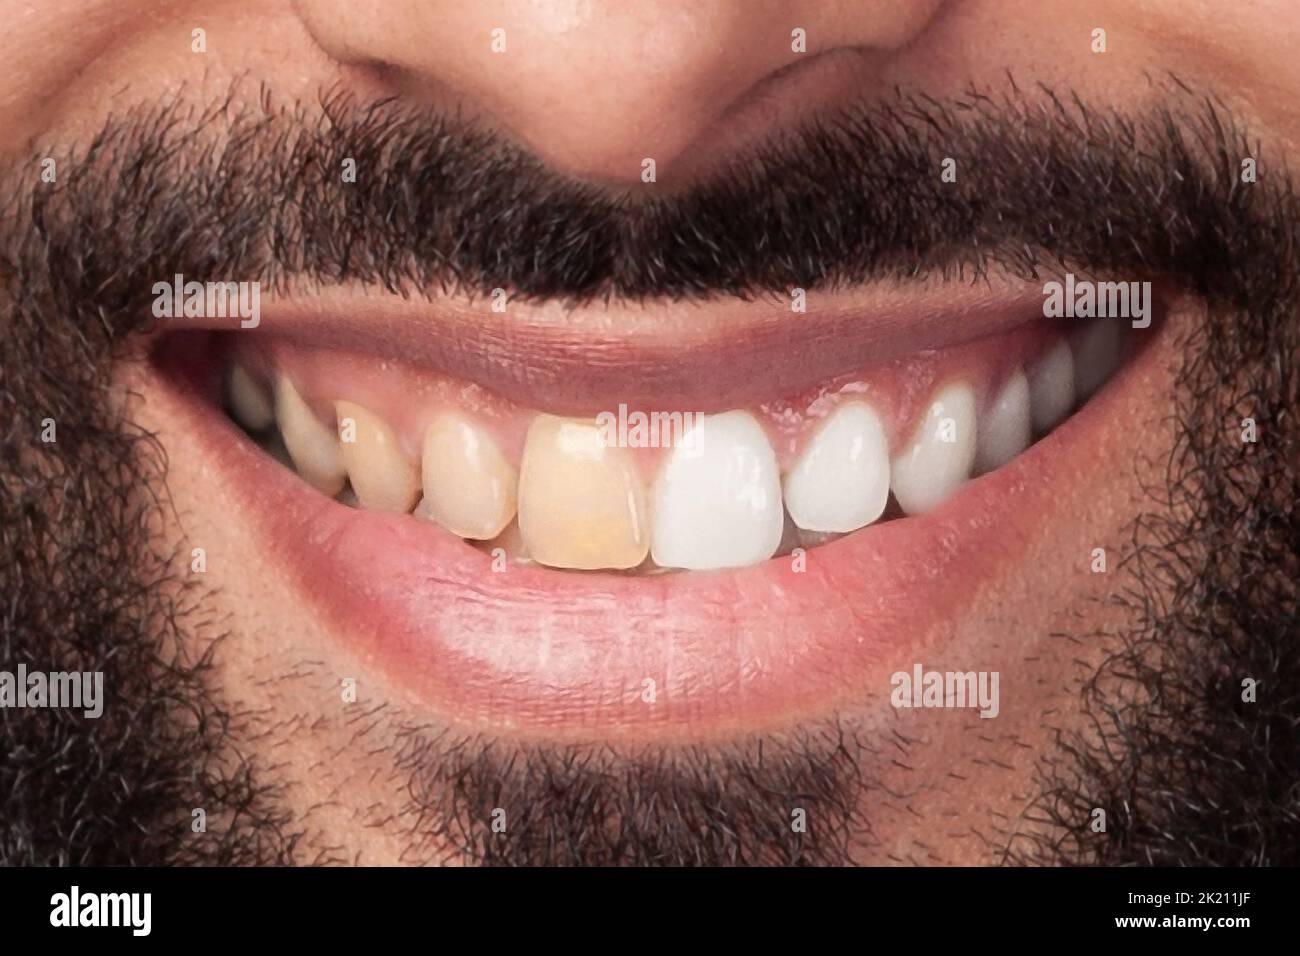 Closeup of man teeth before and after whitening or bleaching of smiling man. Dental health Concept. Oral Care concept Stock Photo